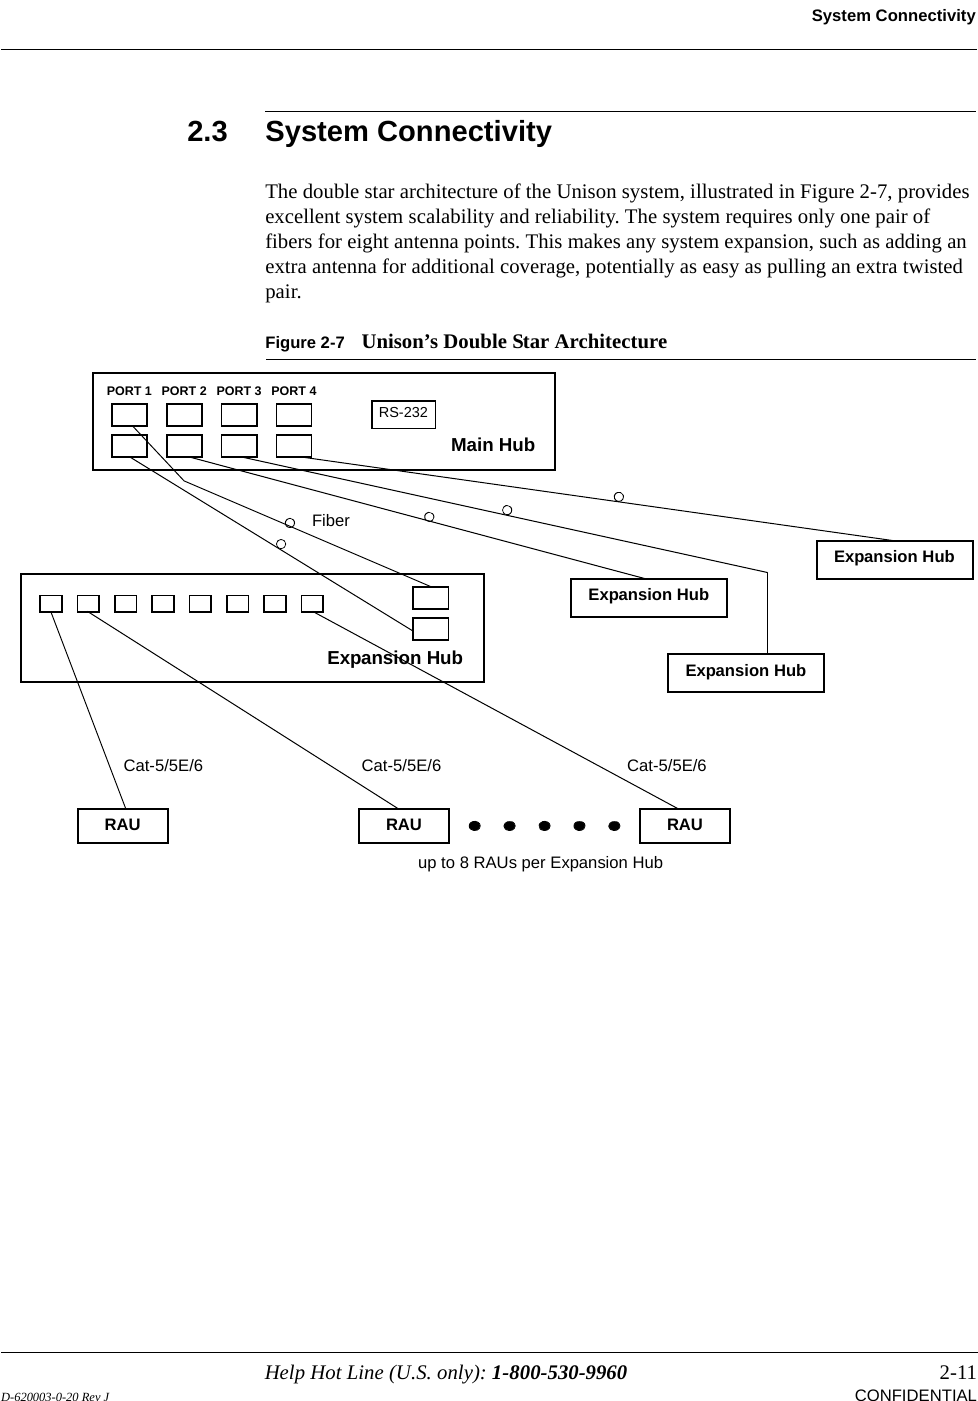 Help Hot Line (U.S. only): 1-800-530-9960 2-11D-620003-0-20 Rev J CONFIDENTIALSystem Connectivity2.3 System ConnectivityThe double star architecture of the Unison system, illustrated in Figure 2-7, provides excellent system scalability and reliability. The system requires only one pair of fibers for eight antenna points. This makes any system expansion, such as adding an extra antenna for additional coverage, potentially as easy as pulling an extra twisted pair.Figure 2-7 Unison’s Double Star ArchitectureMain HubRS-232PORT 1 PORT 2 PORT 3 PORT 4Expansion Hub Expansion HubFiberExpansion HubExpansion HubCat-5/5E/6Cat-5/5E/6 Cat-5/5E/6up to 8 RAUs per Expansion HubRAU RAU RAU